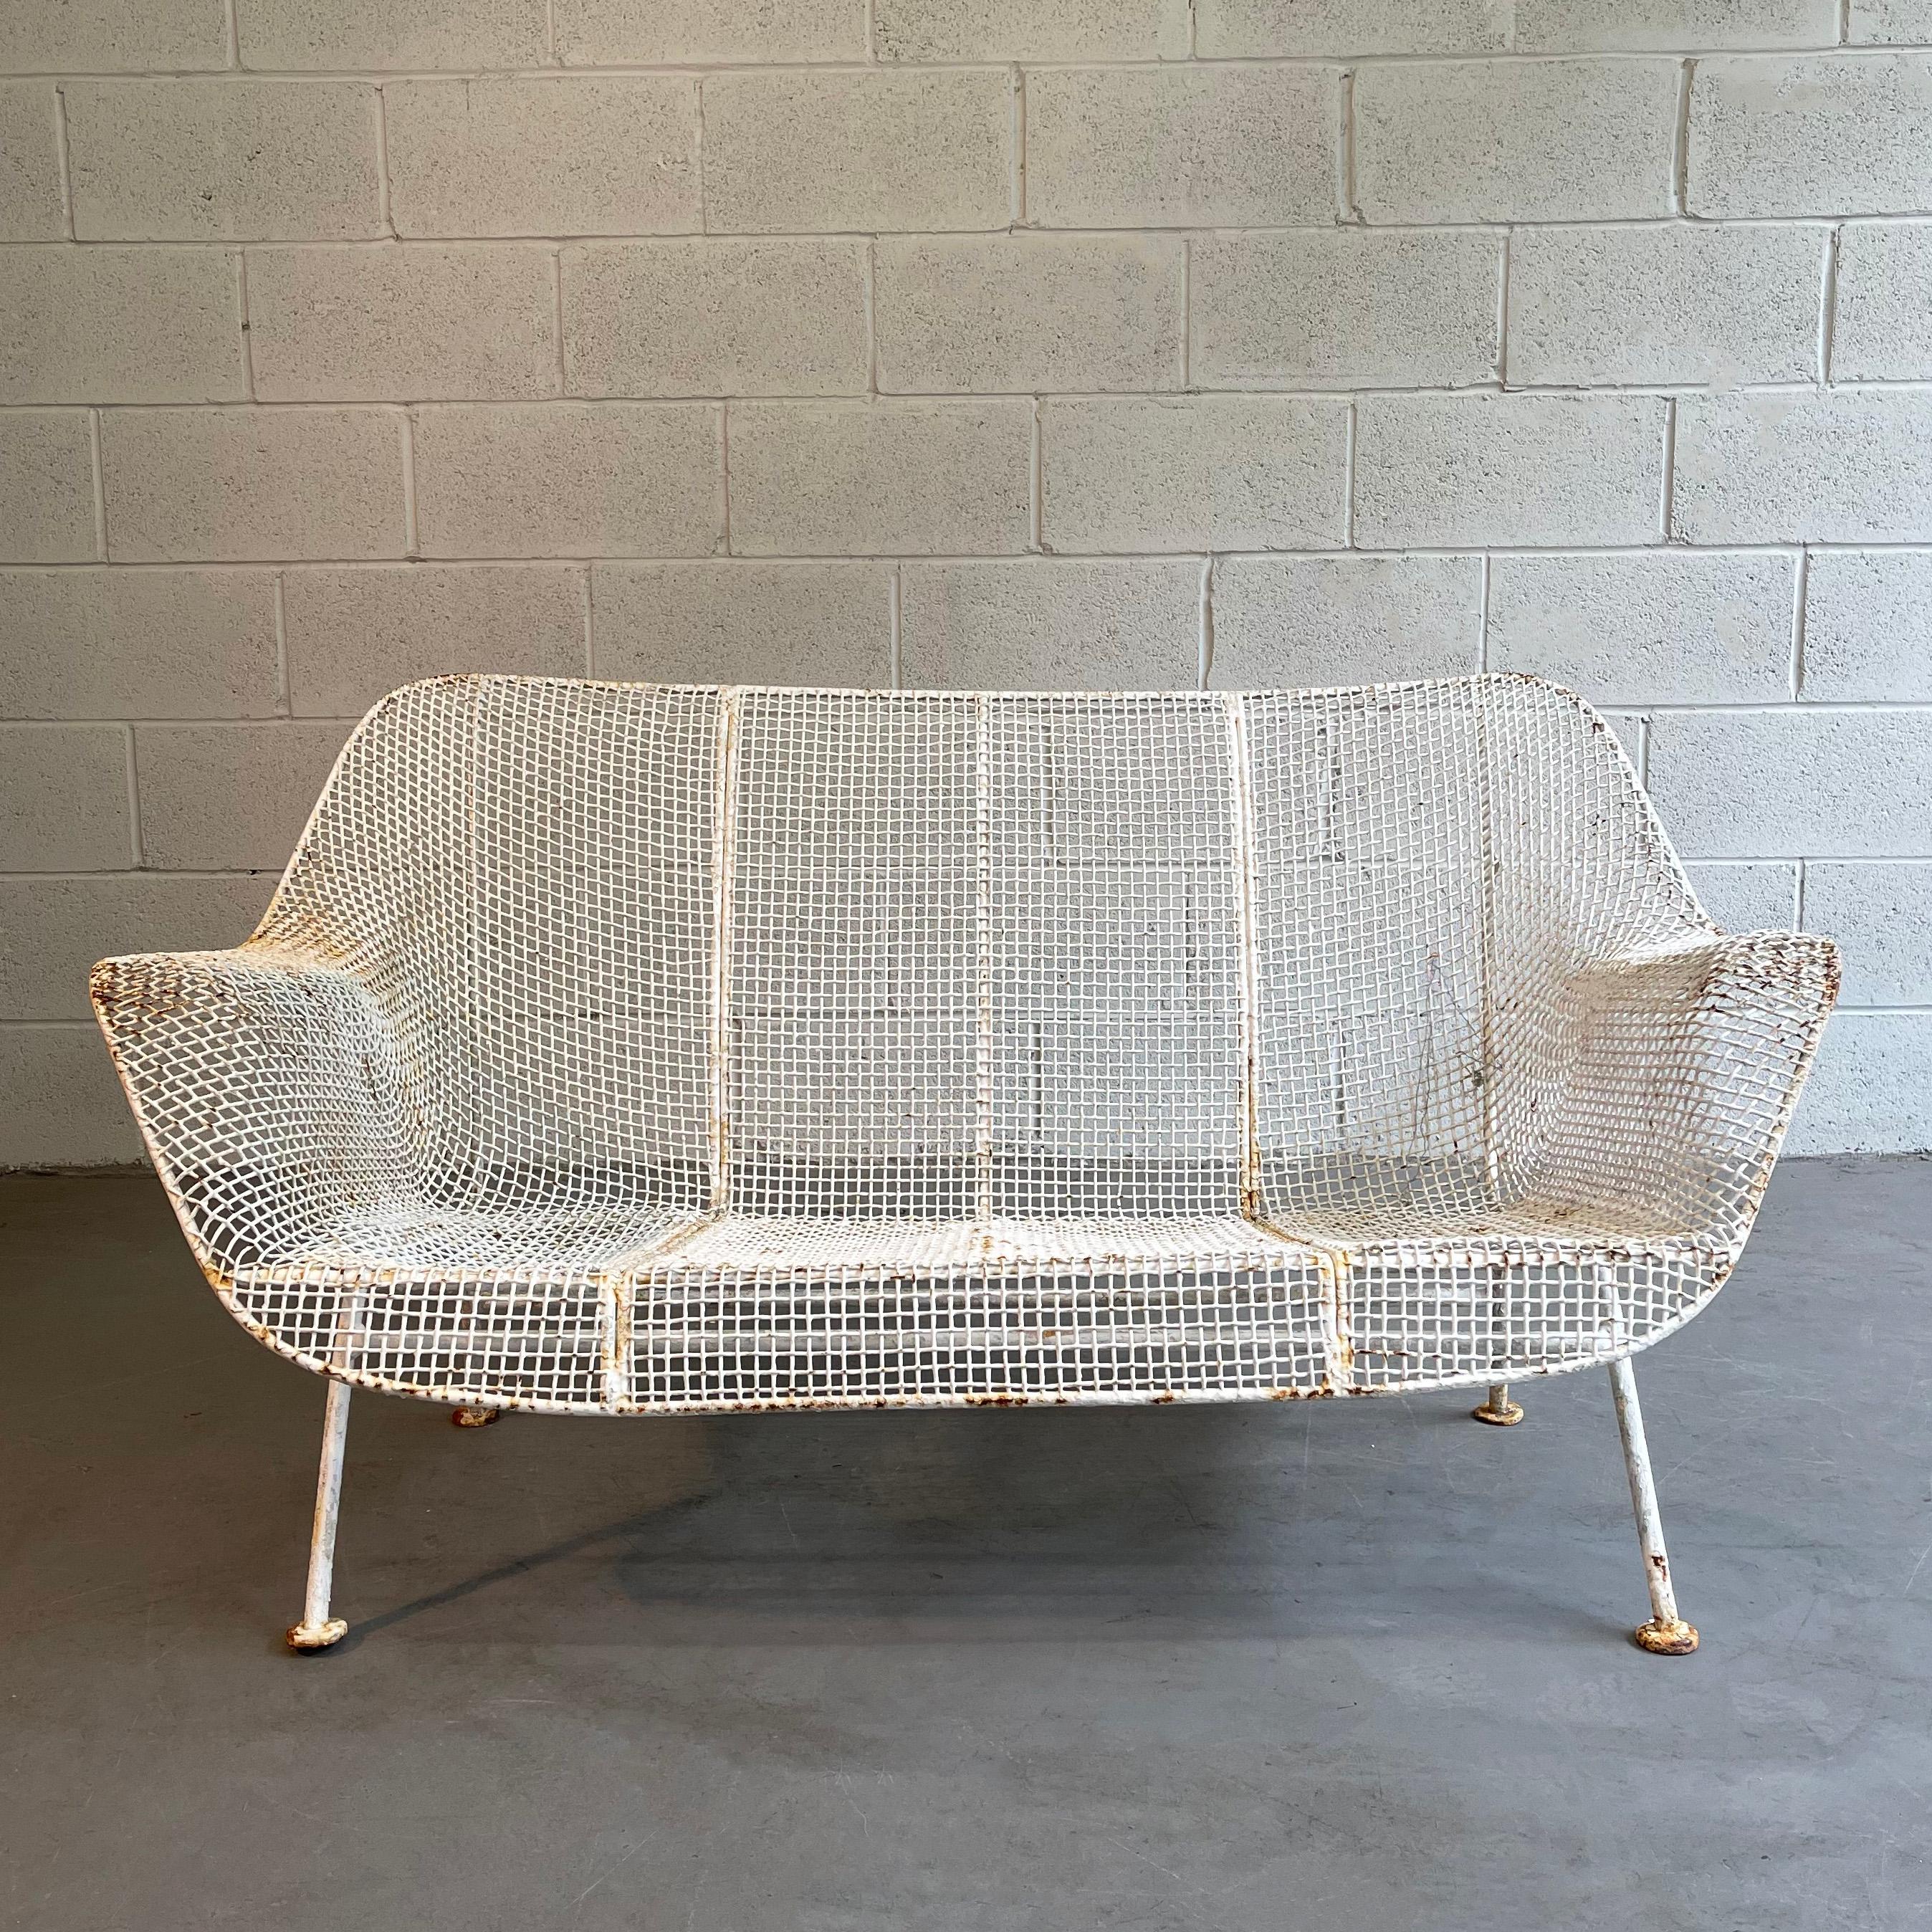 Mid-Century Modern, outdoor, patio, powder-coated, steel mesh and wrought iron loveseat sofa by Russell Woodard, Sculptura. Cushions are not available.